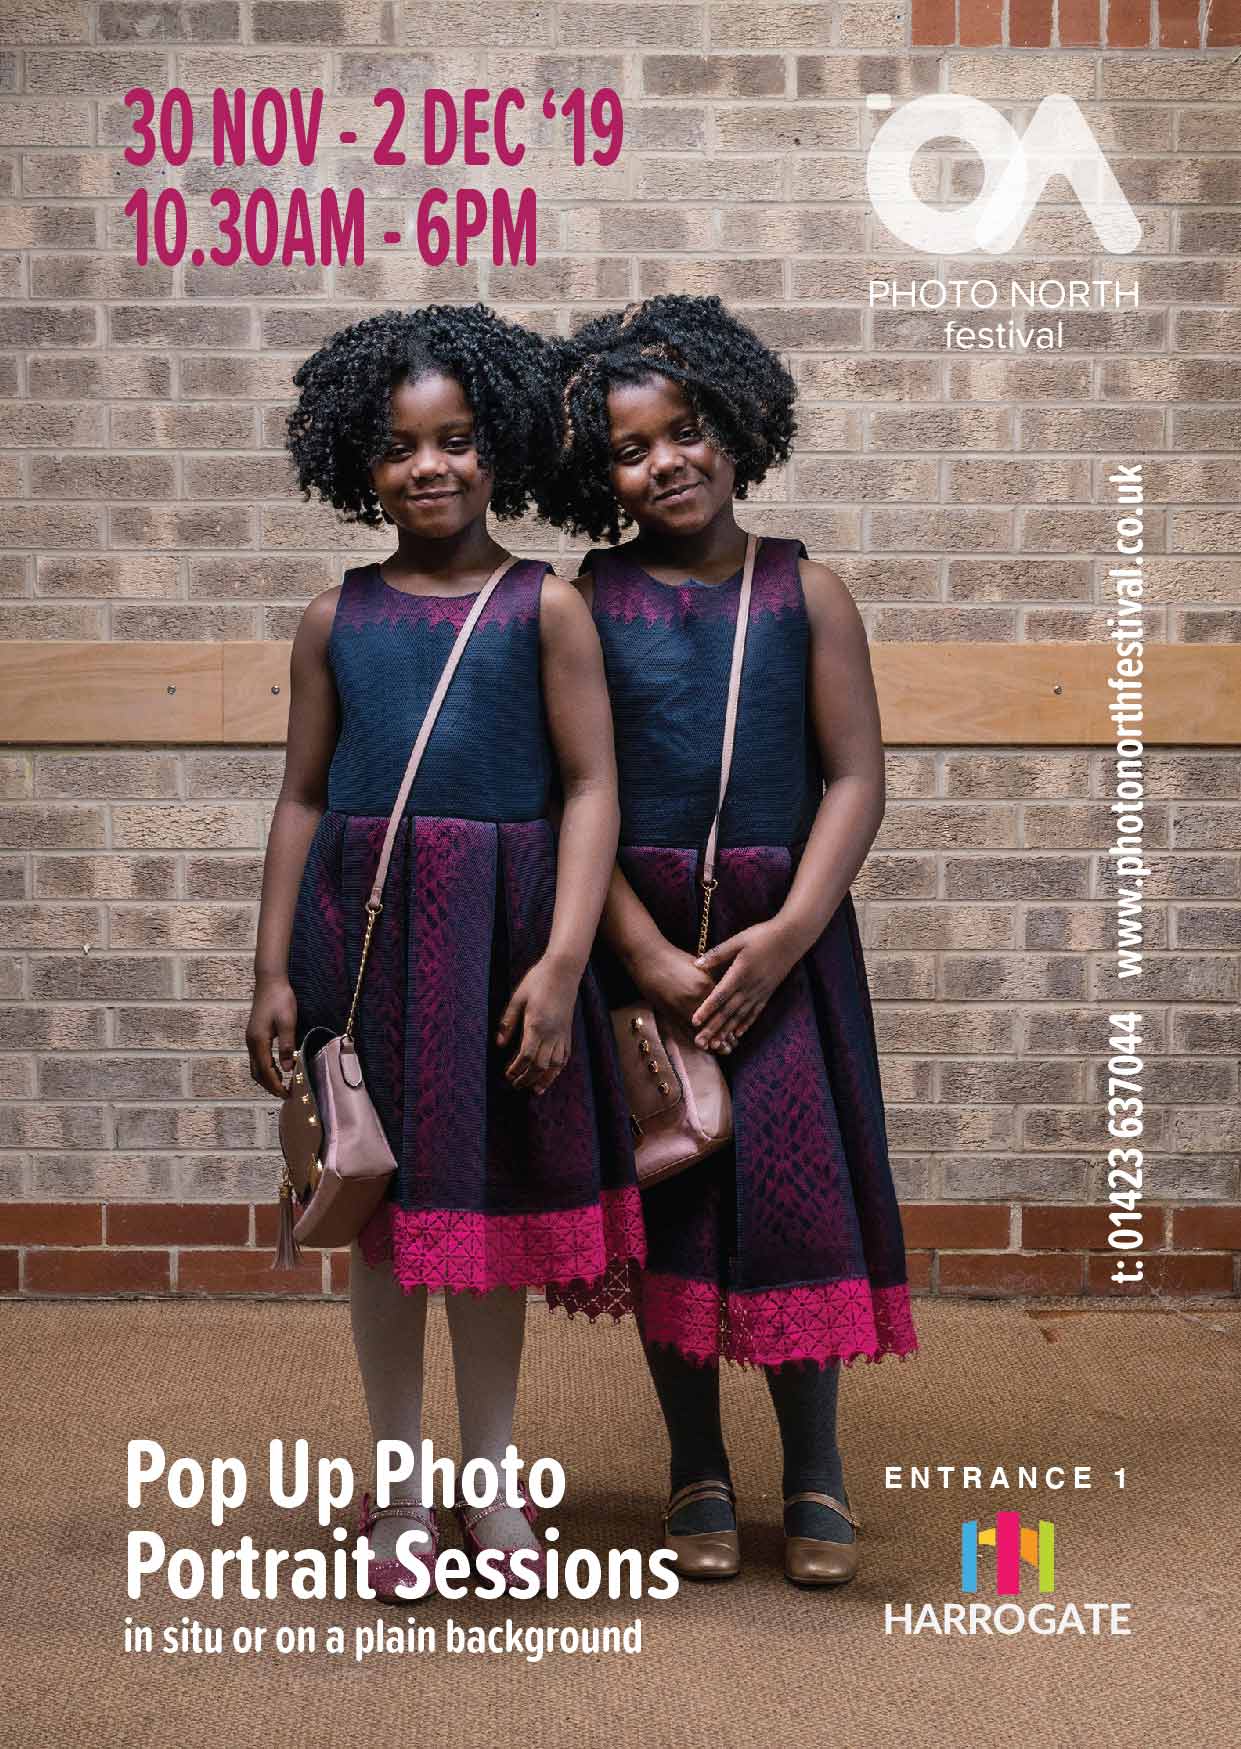 Pop Up Photo Portrait Sessions at the Photo North festival